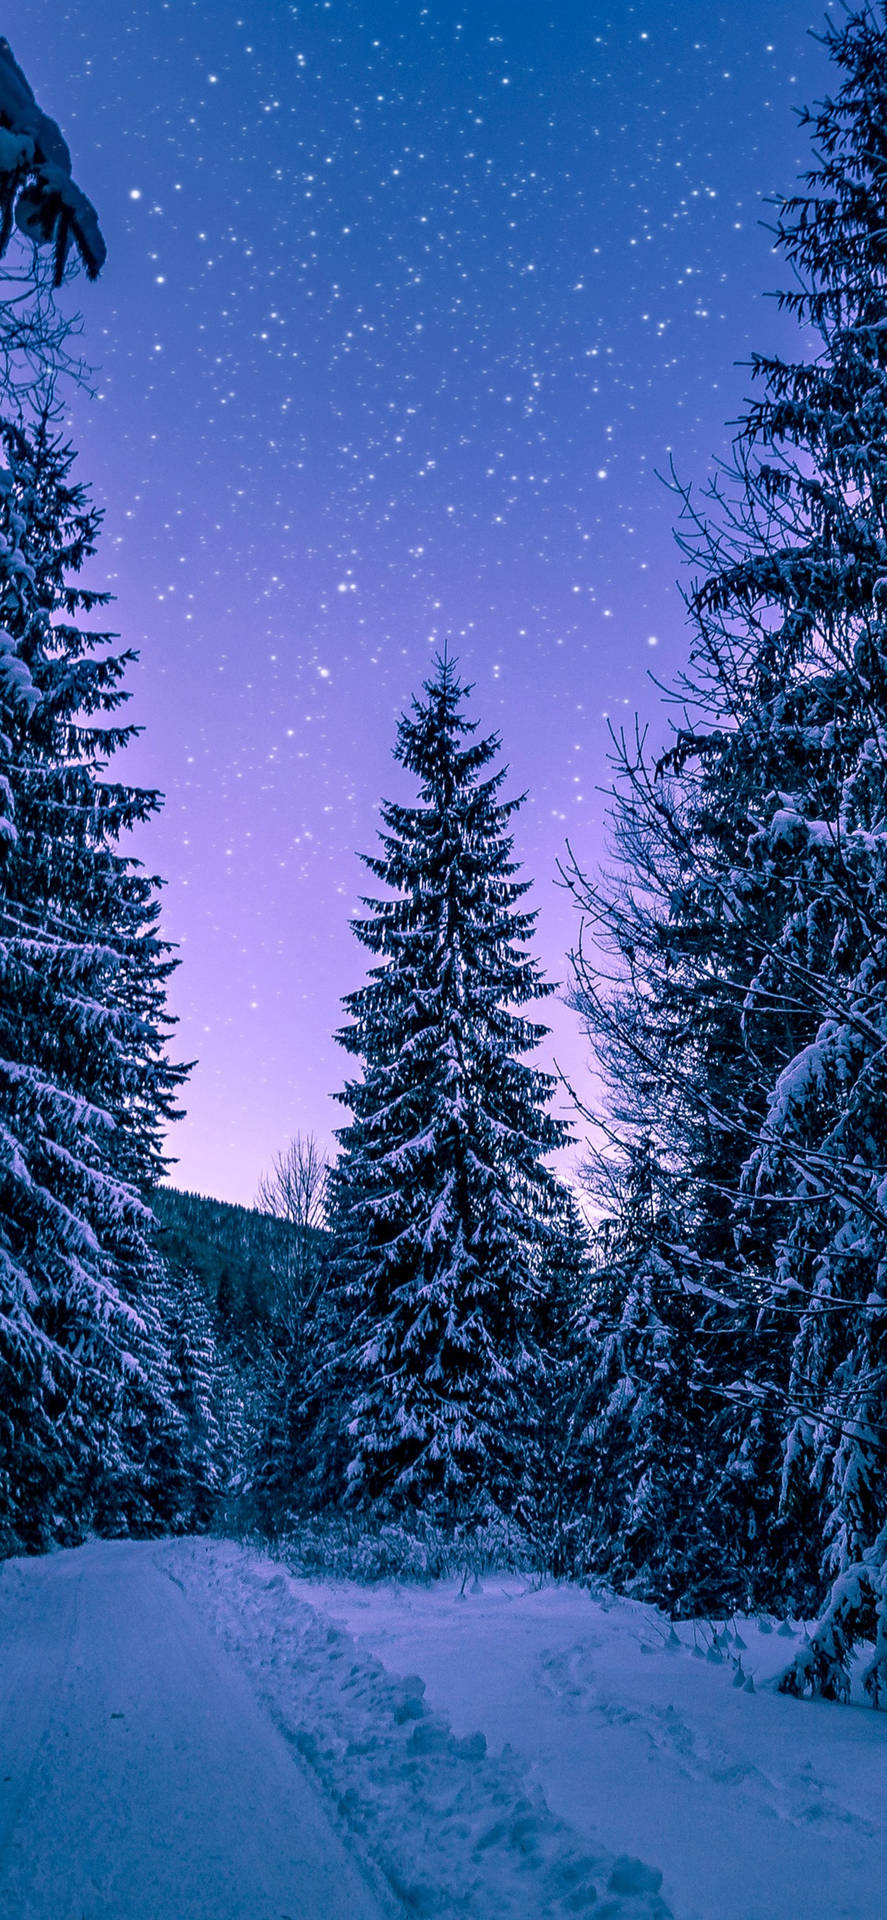 Dreamy Winter Forest Iphone Wallpaper